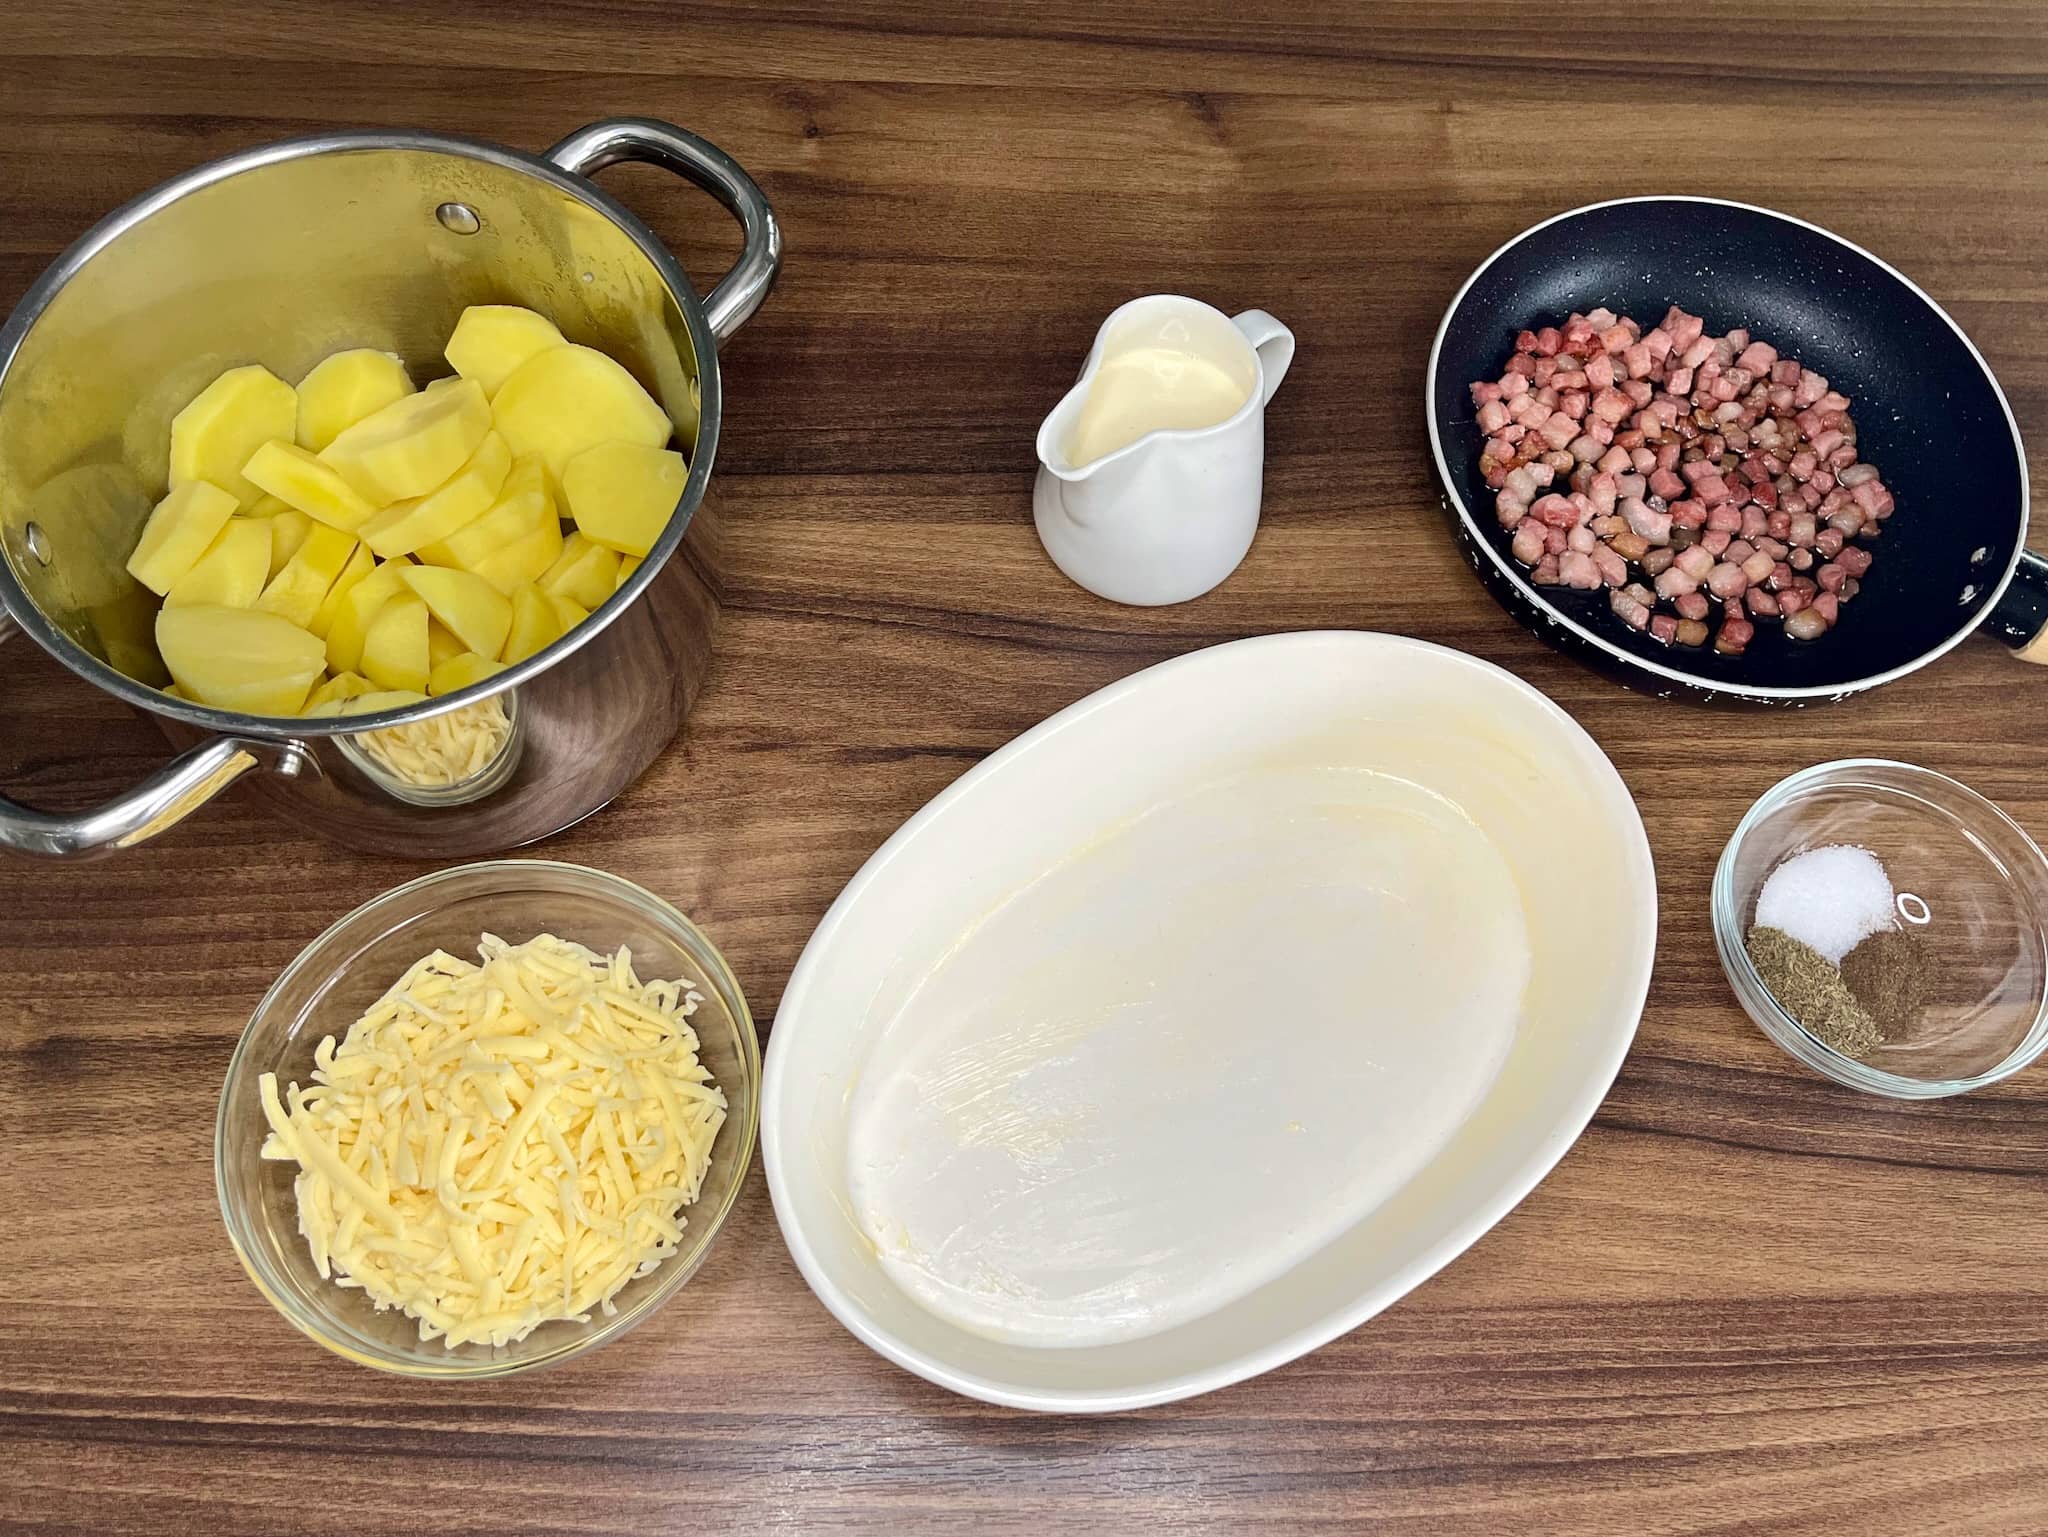 Ingredients for Cheesy Baked Potatoes with Pancetta on a tabletop